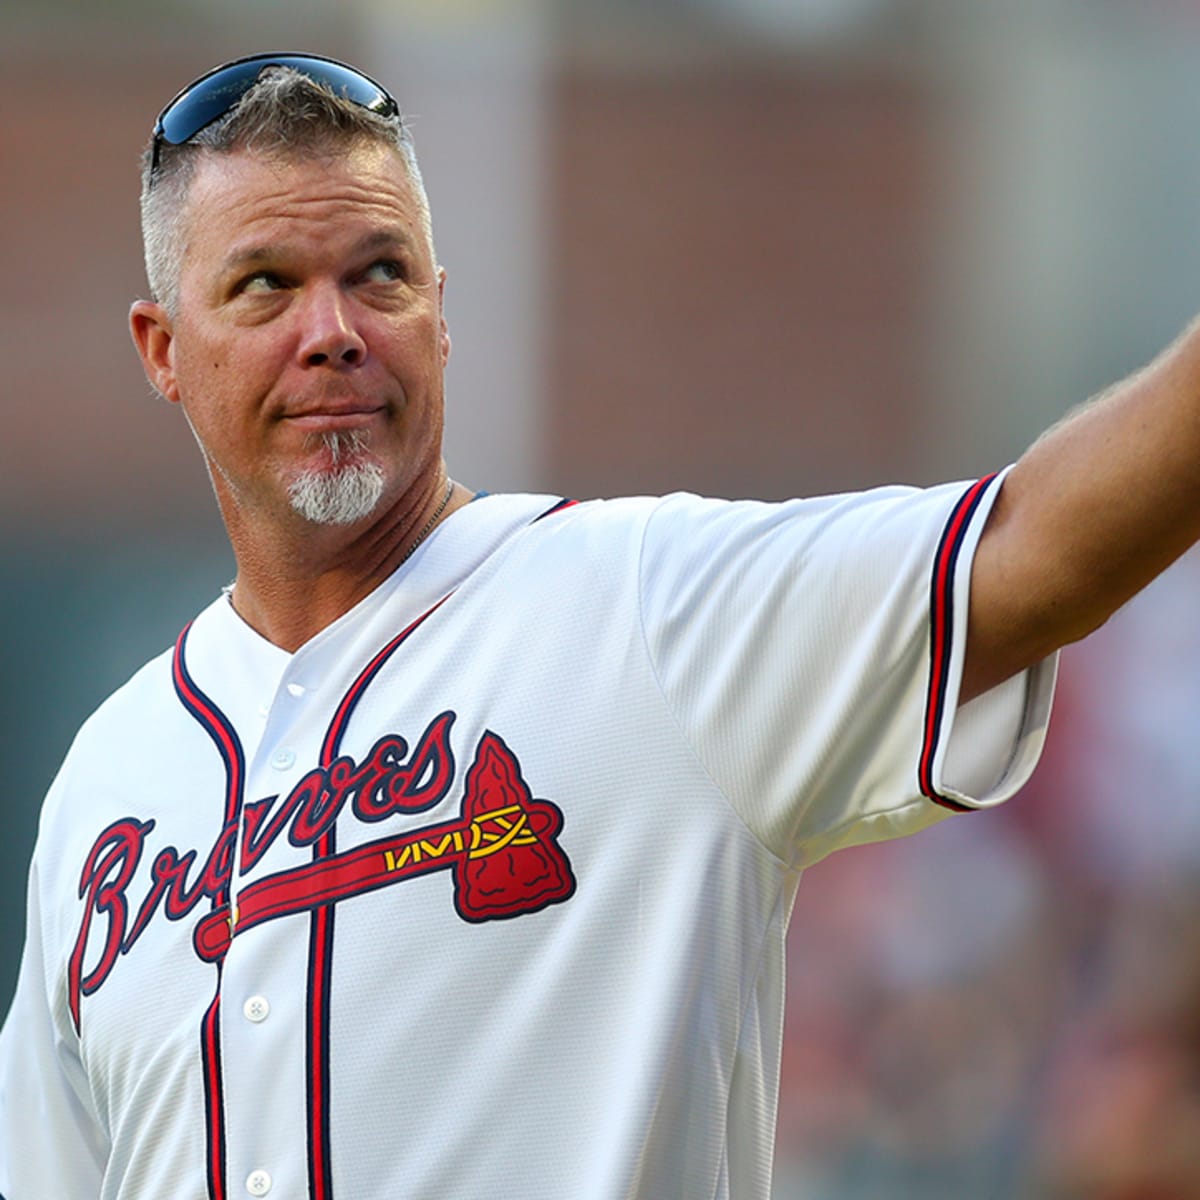 Chipper Jones gratified to earn All-Star spot but angry after umpire's  strikeout call in loss 